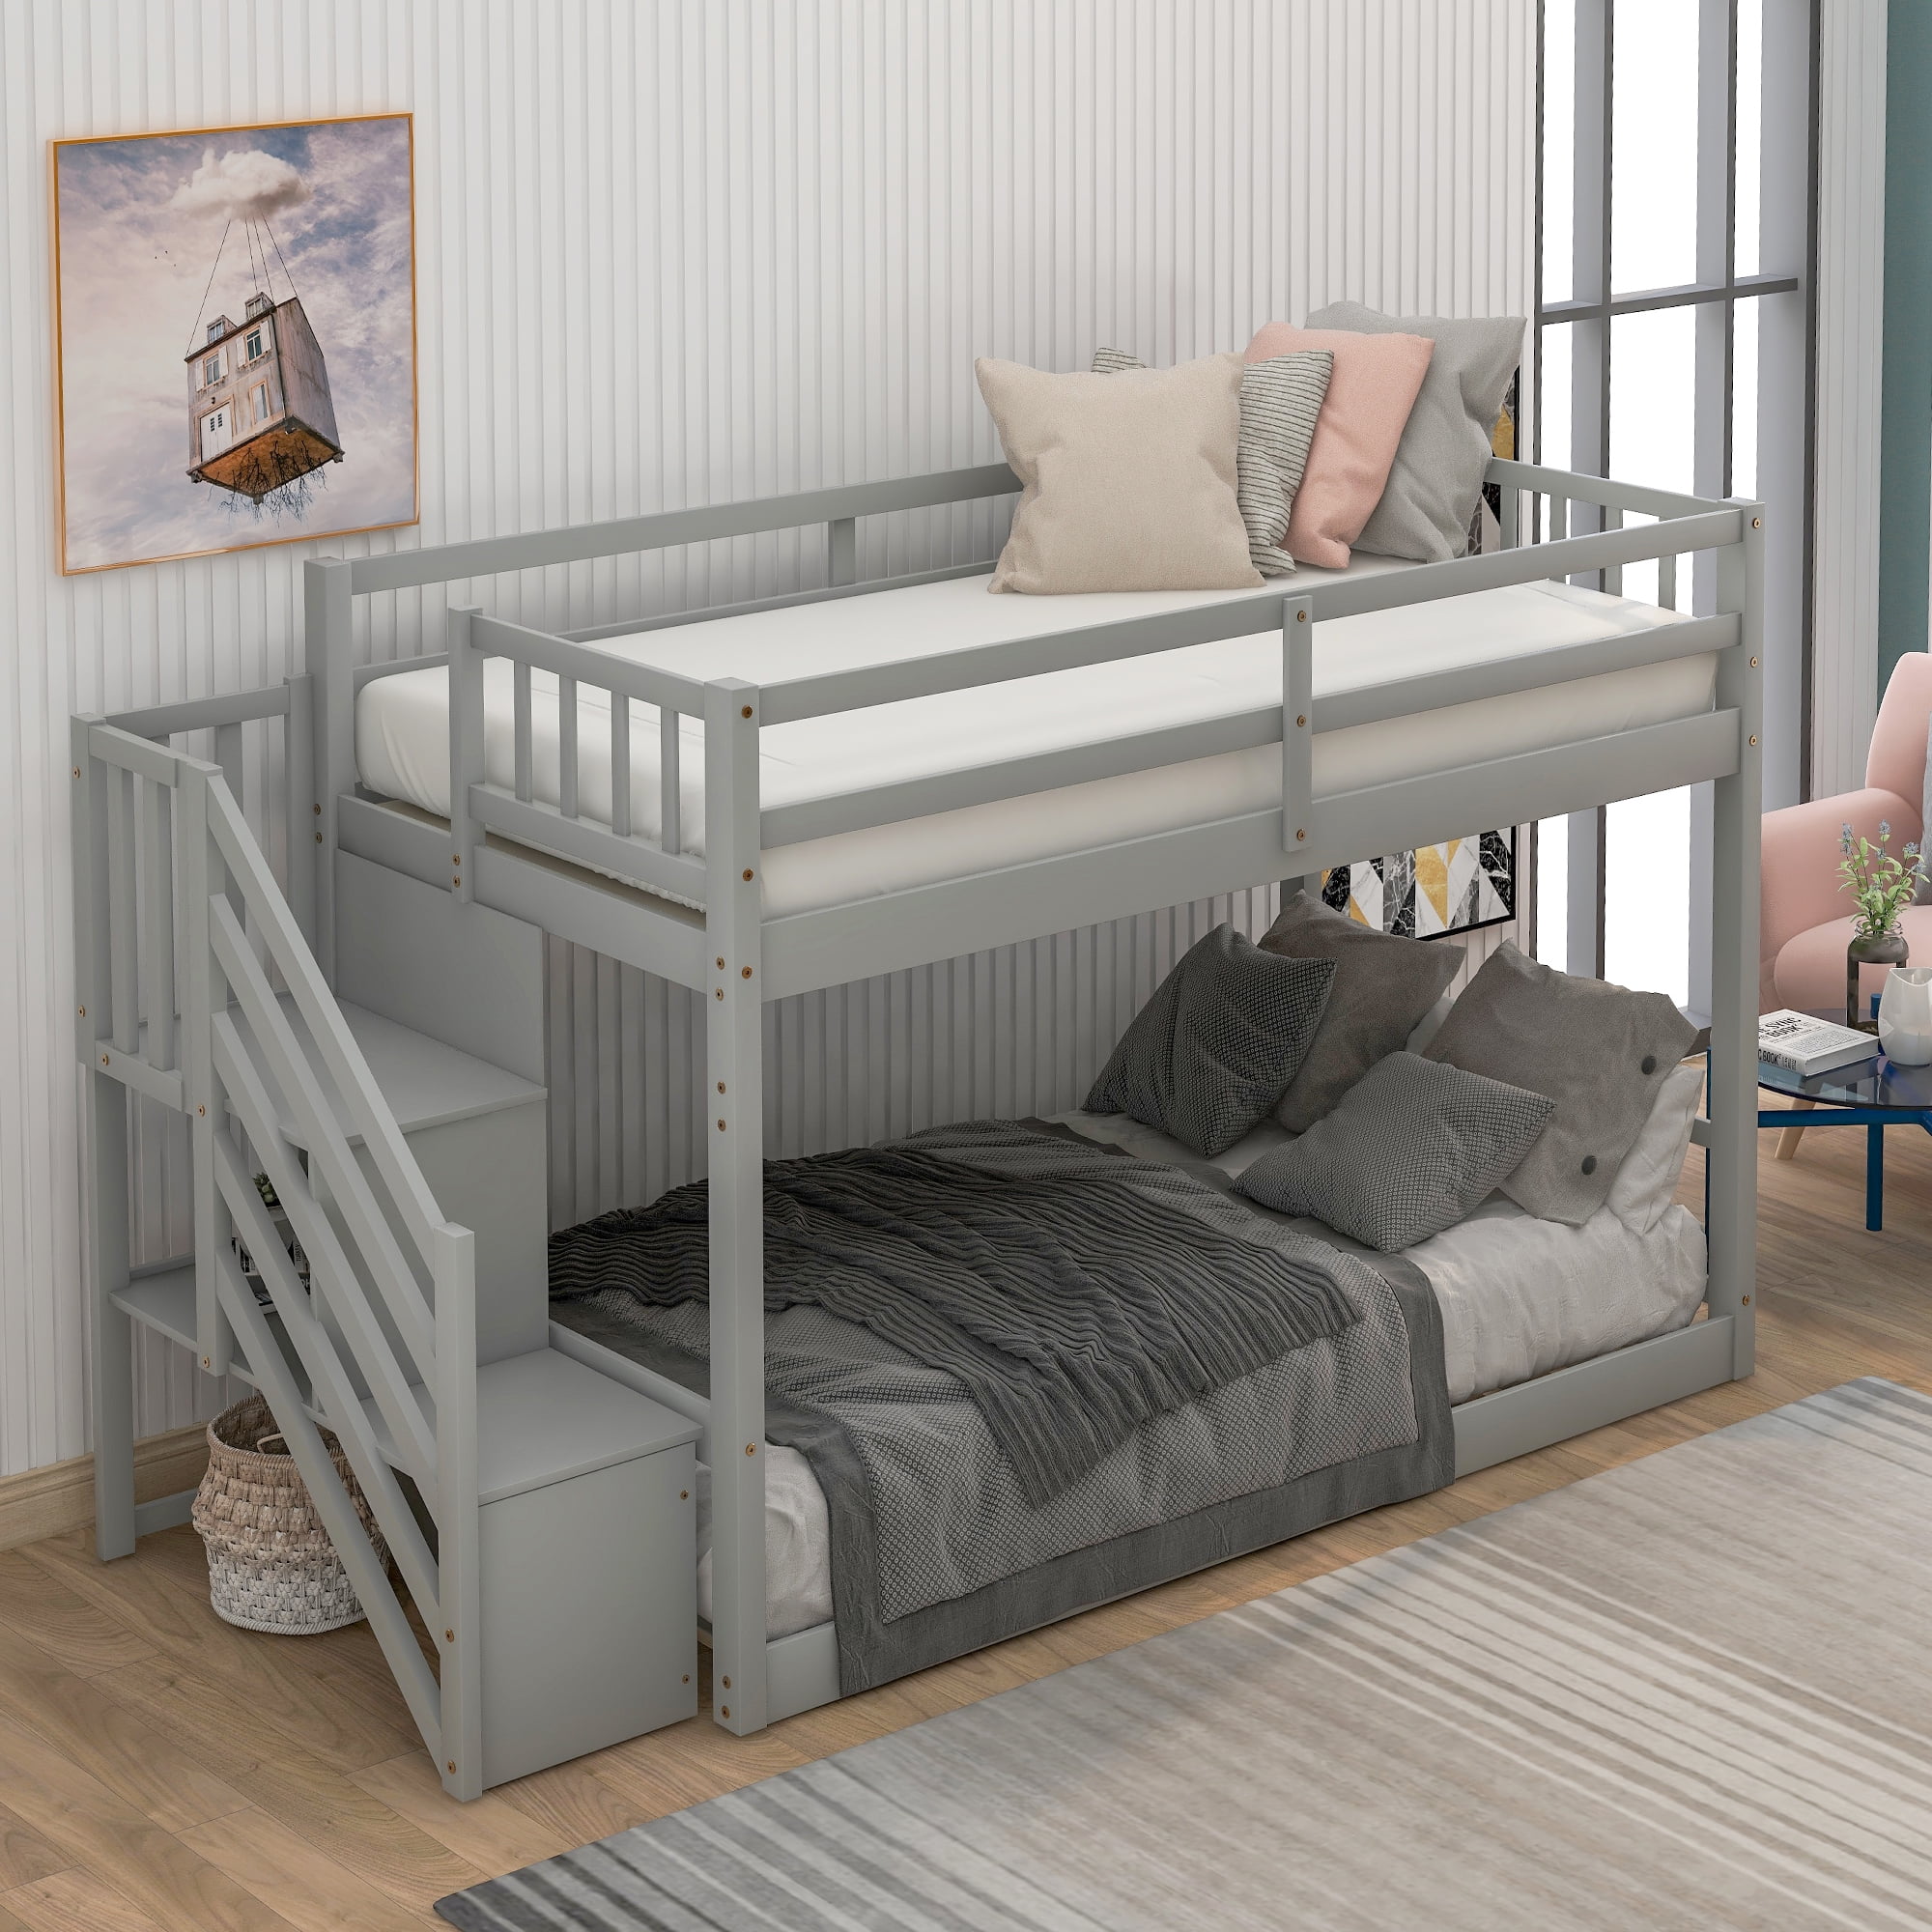 Euroco Wood Twin Over Floor Bunk, Twin Over Twin Bunk Bed With Stairs